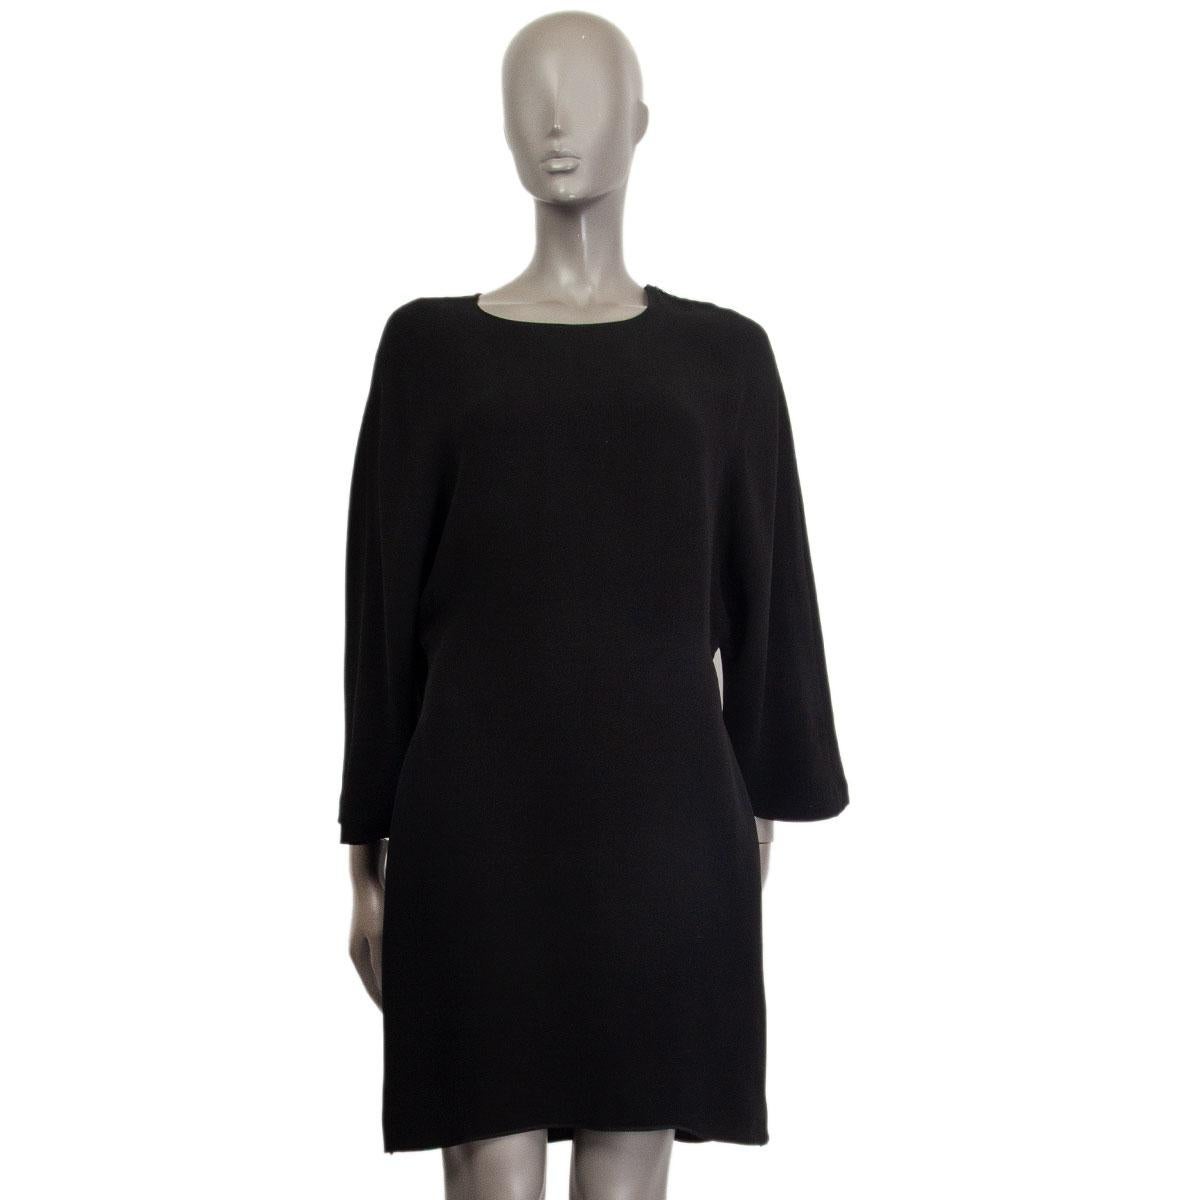 100% authentic Jil Sander dolman-sleeve shift dress in black silk (missing content tag) with round neck-line. Closes with a zipper on the left shoulder and one on the left side. Unlined. Has been worn and is in excellent condition.

Tag Size	Missing